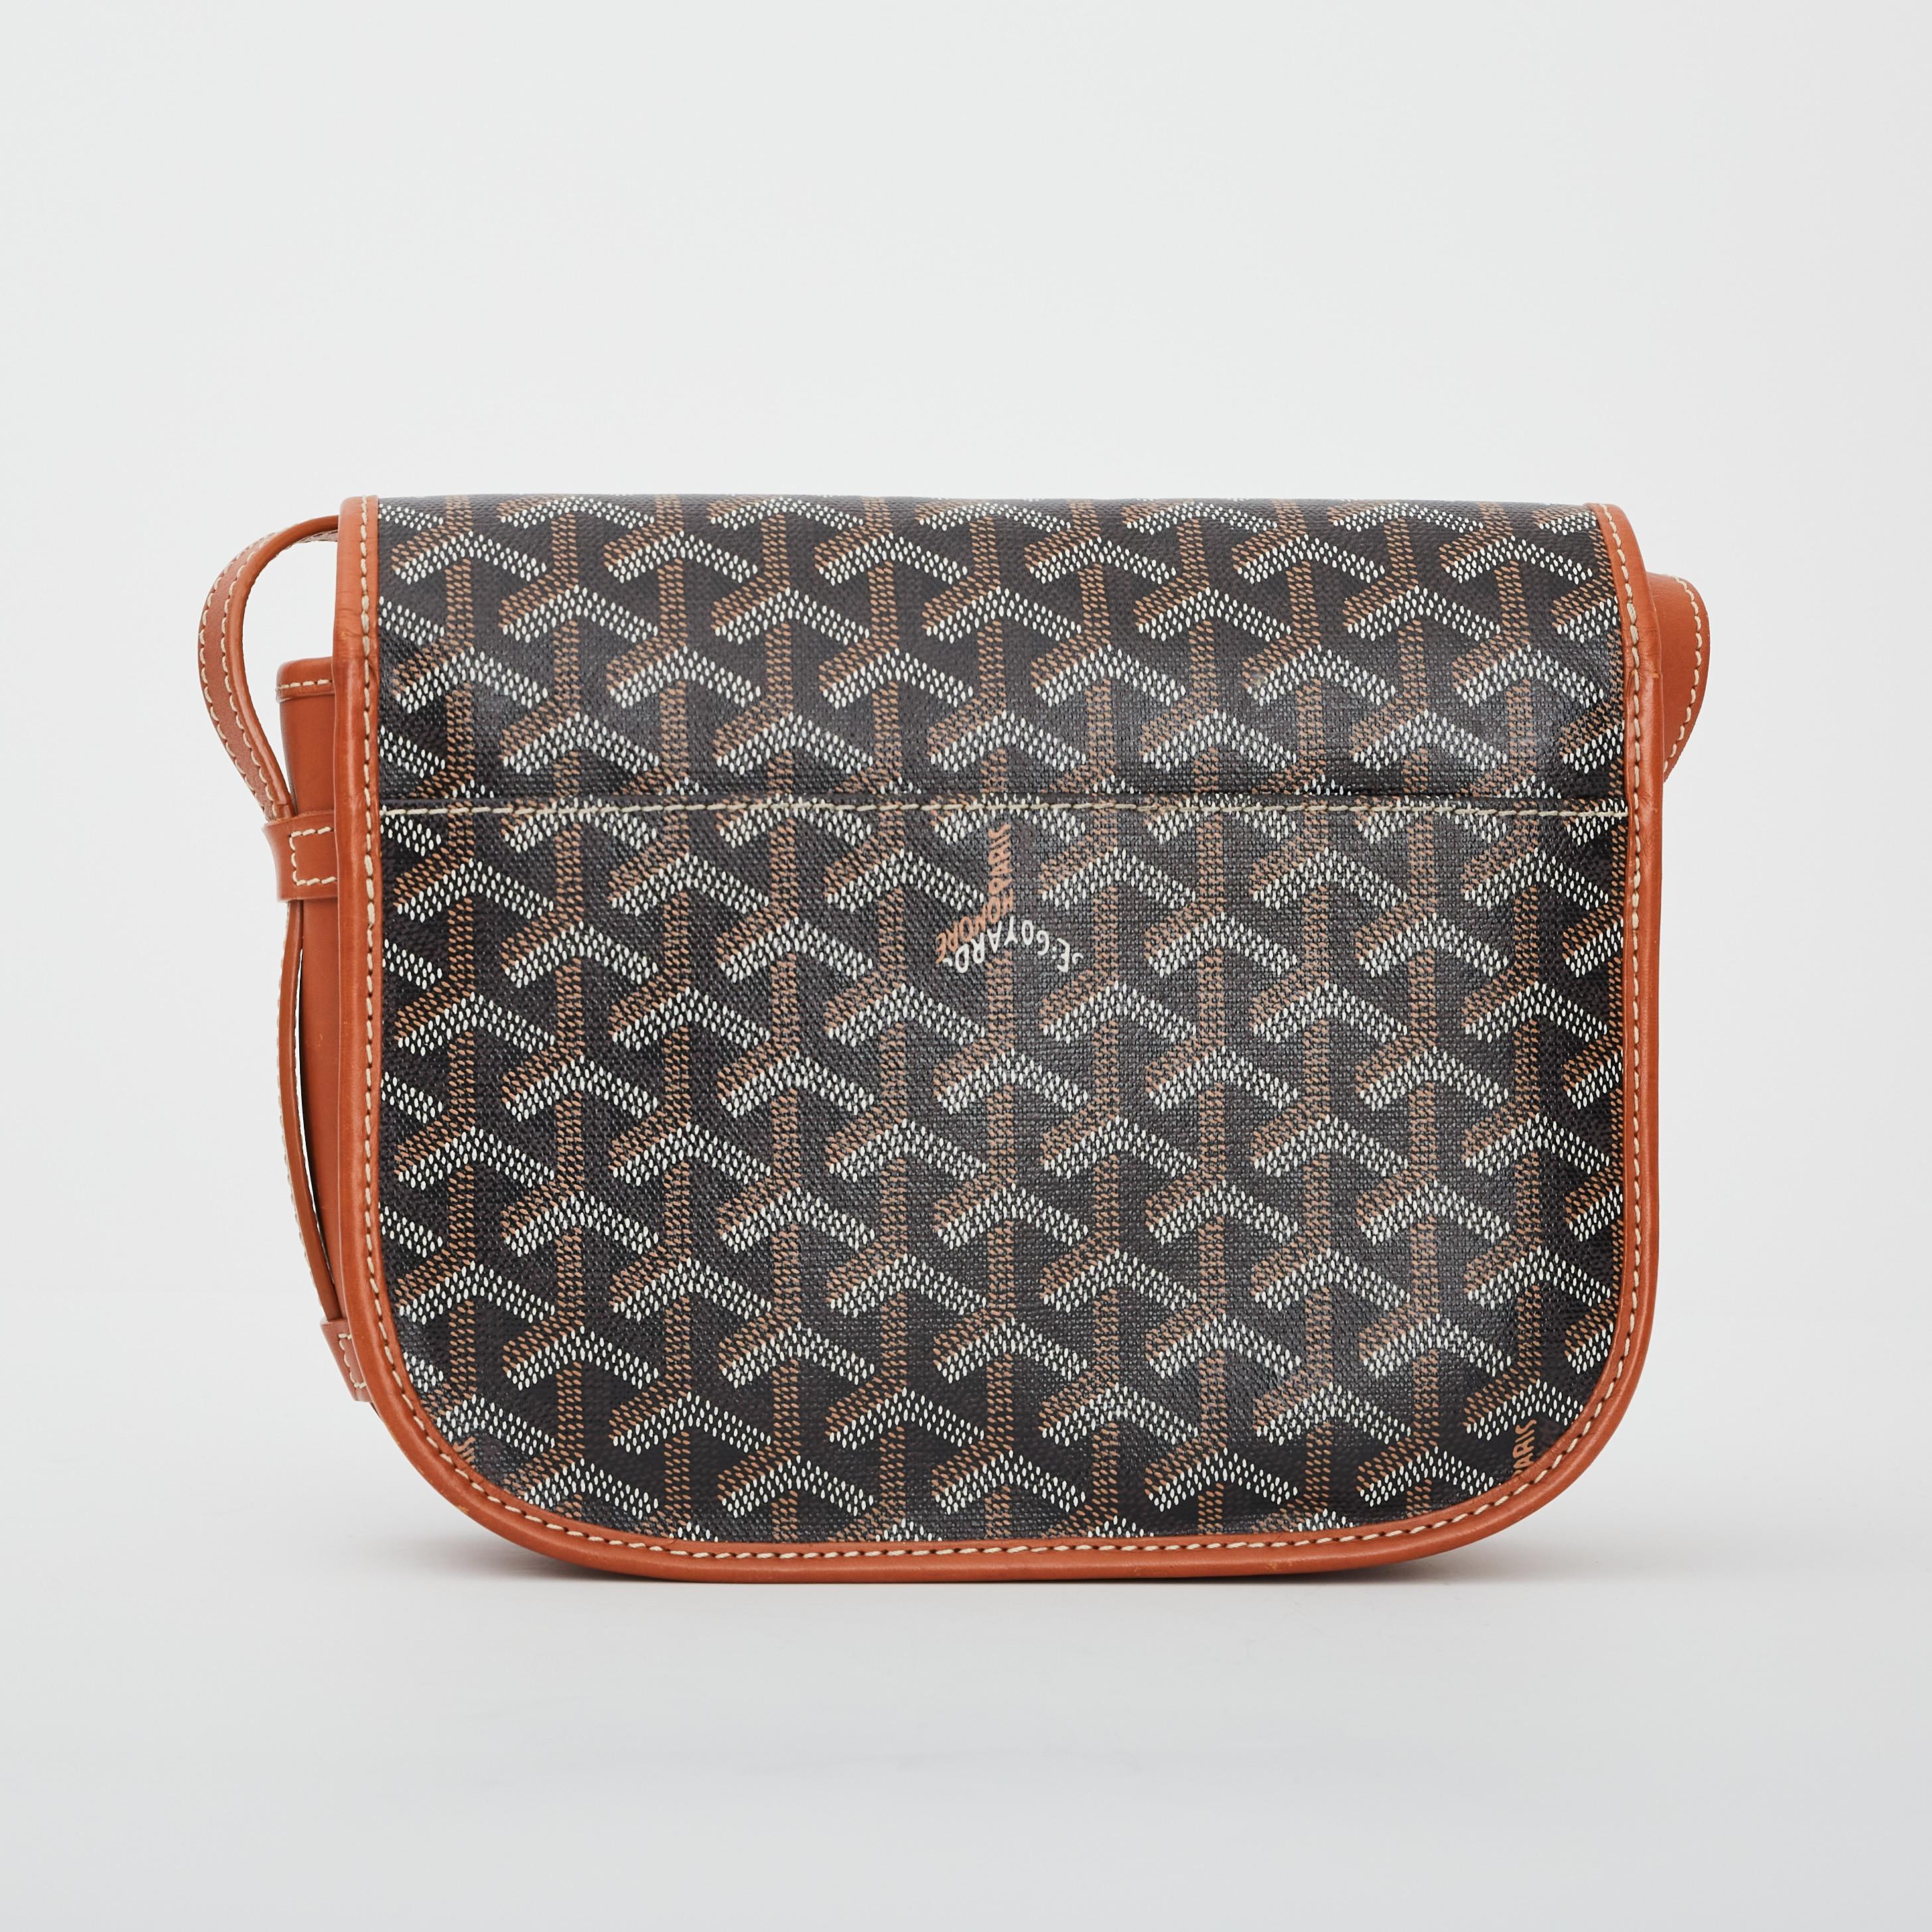 Belvedere MM Bag from Goyard is crafted in signature coated canvas in black featuring tan leather trims and white contrast stitching, an adjustable shoulder strap, front flap with buckle closure and exterior slip pocket at the back. The interior is